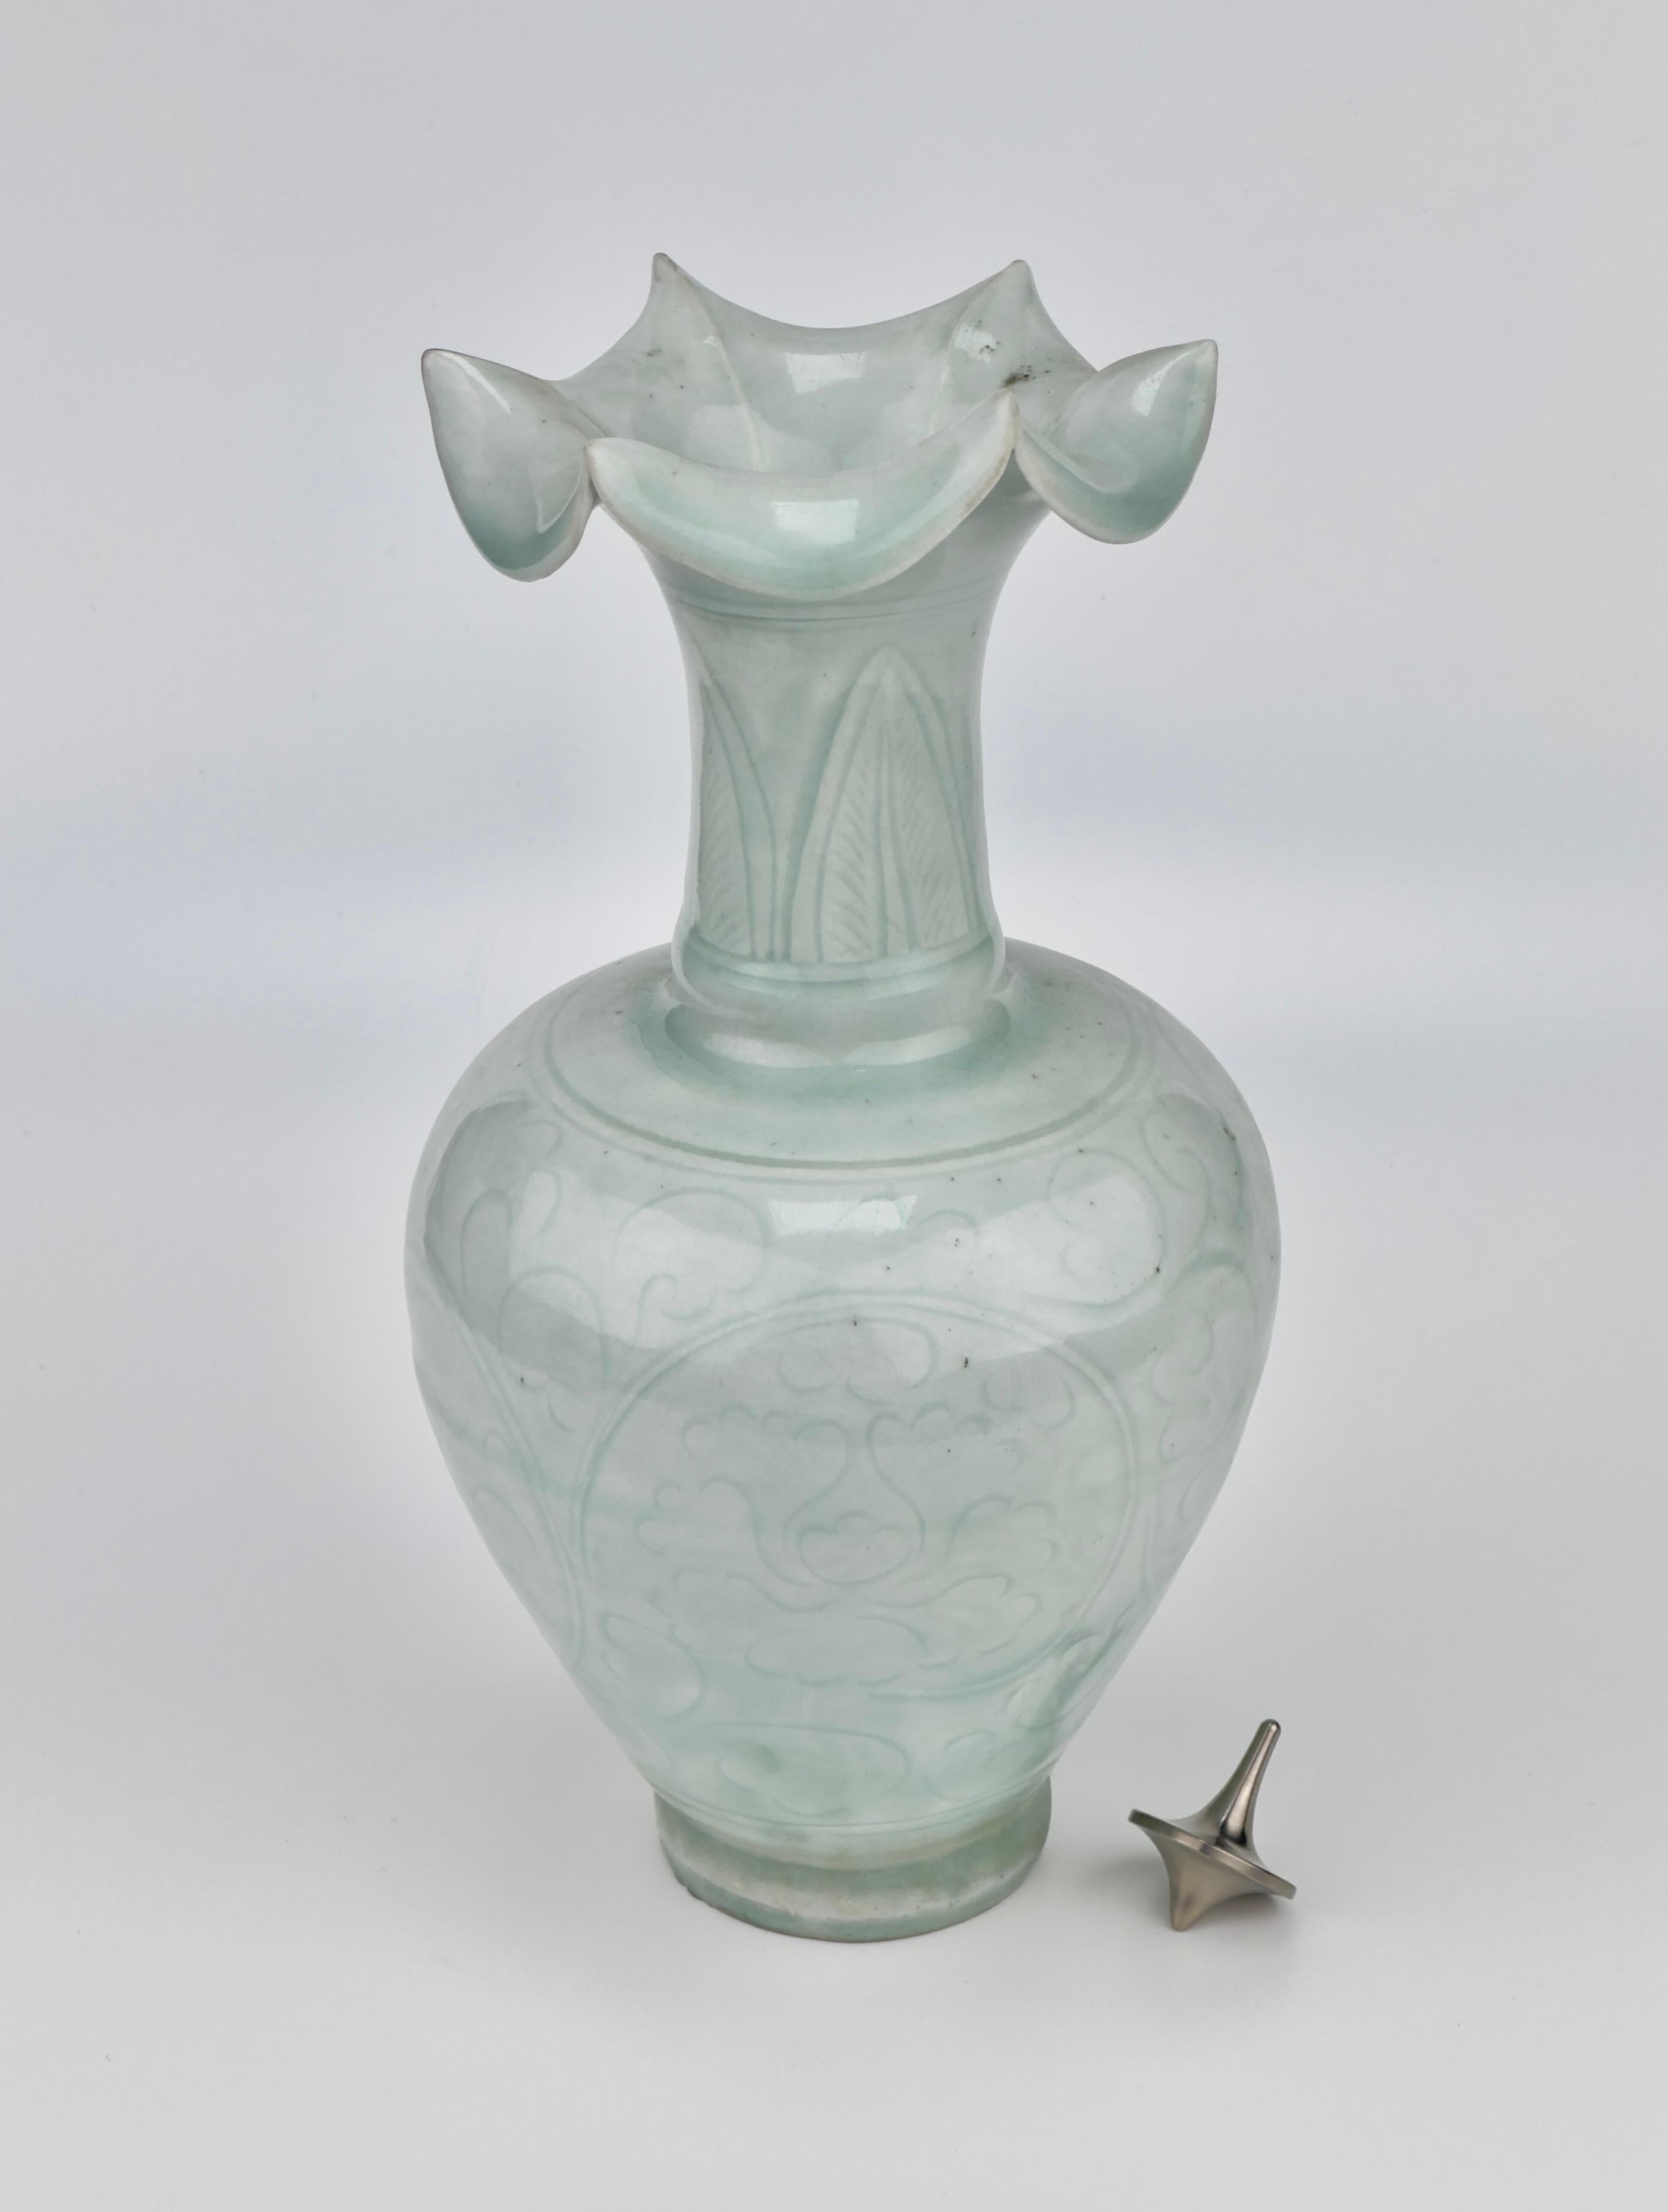 Ceramic A Carved Qingbai 'Chrysanthemum' Vase, Song-Yuan Dynasty(13-14th century) For Sale